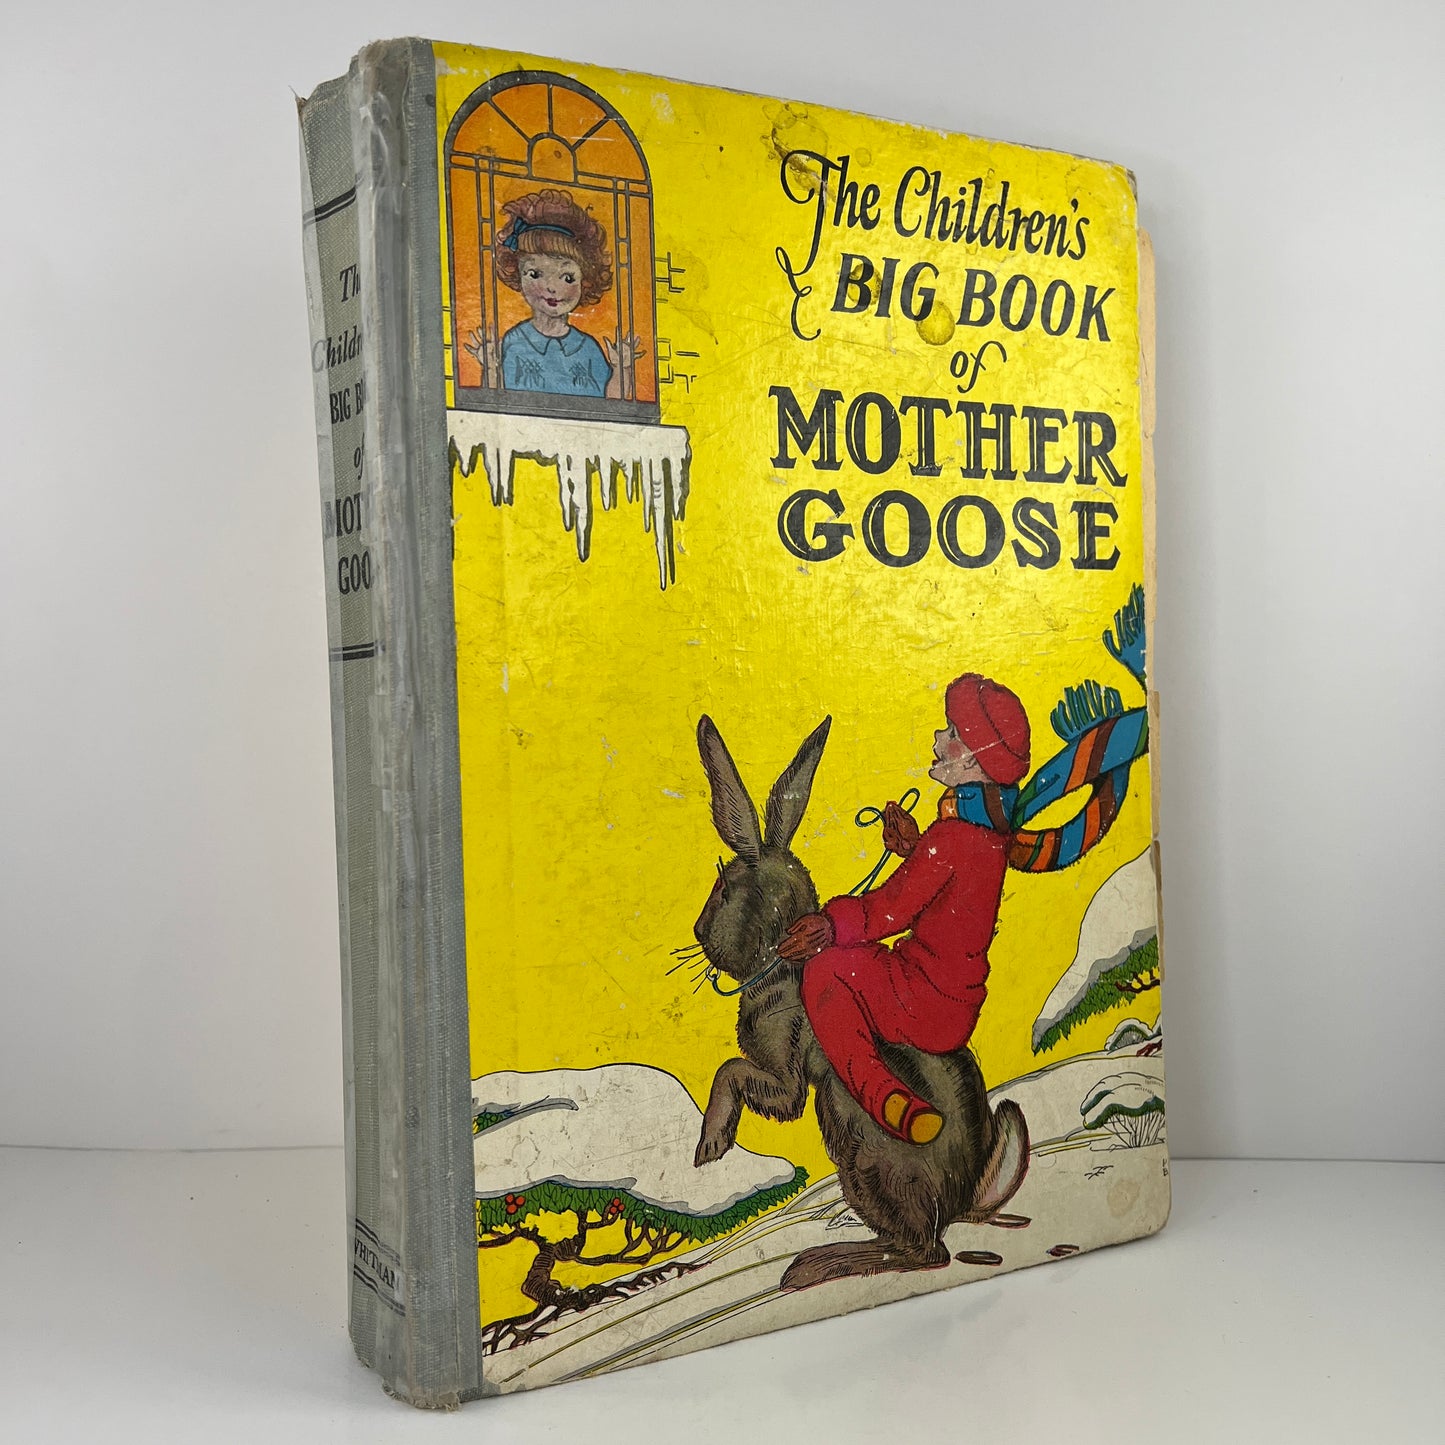 The Children's Big Book of Mother Goose